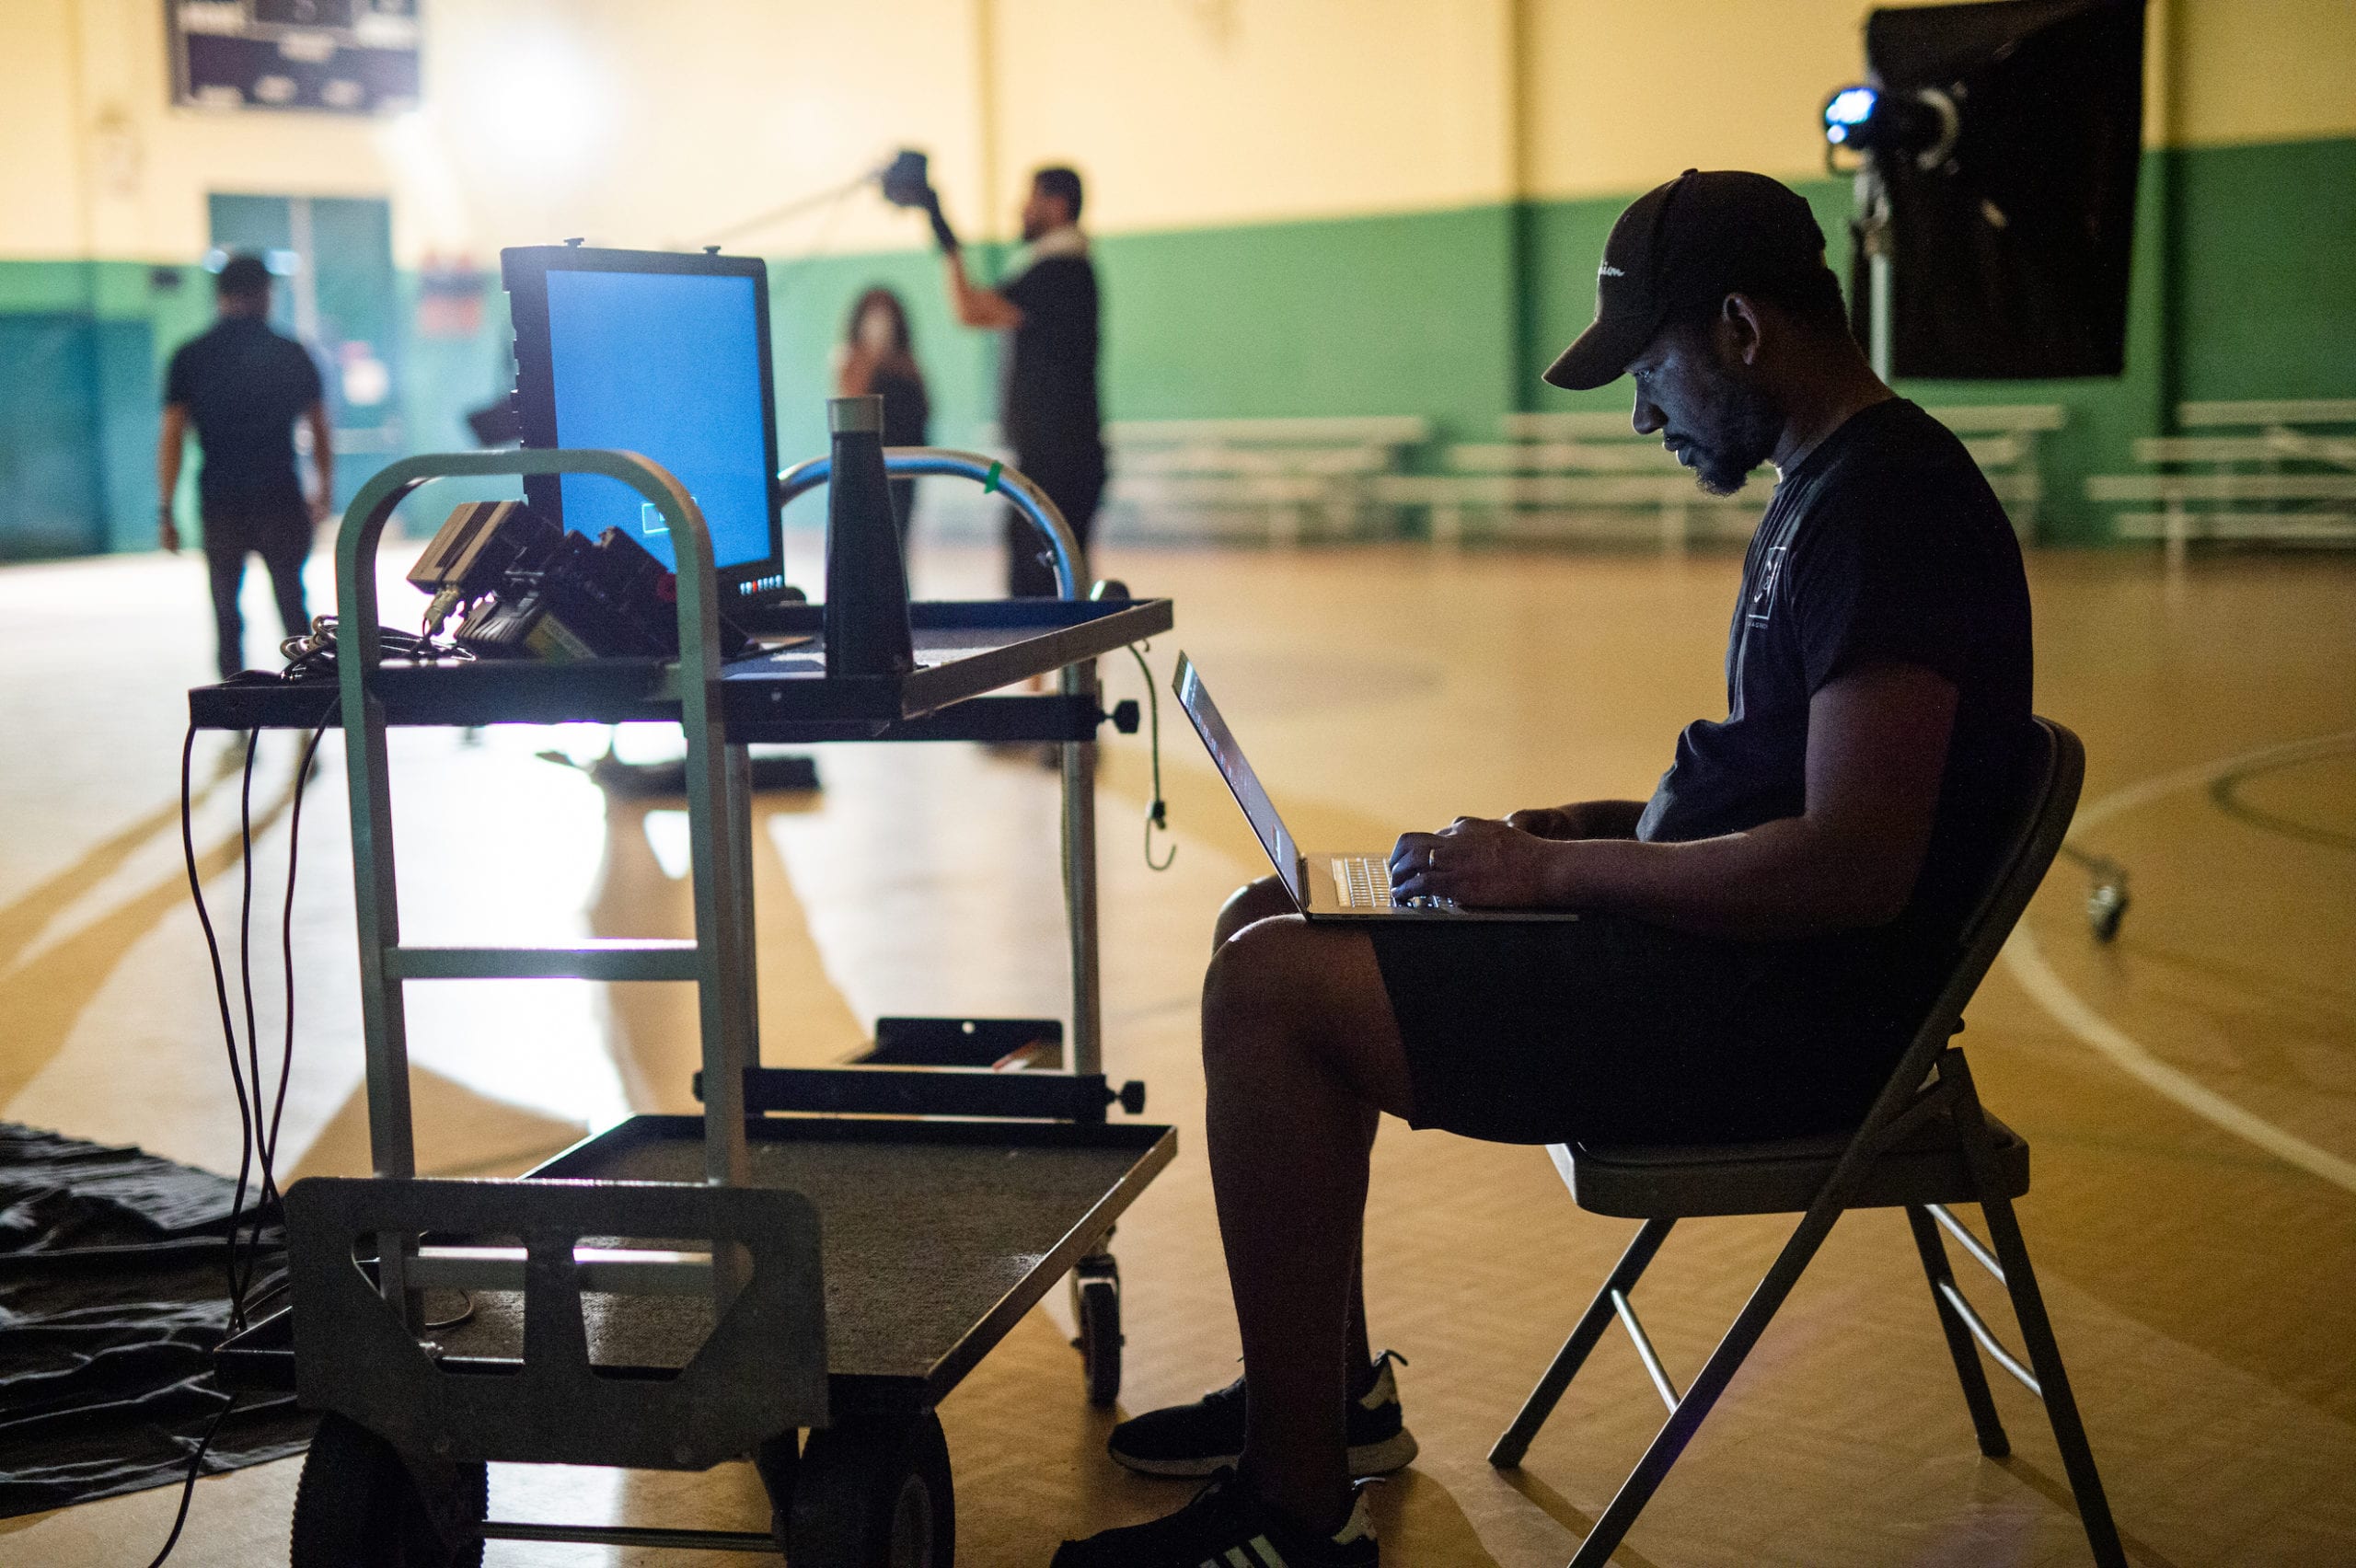 Nike African American man checking laptop next to a cart of video equipment on a basketball court